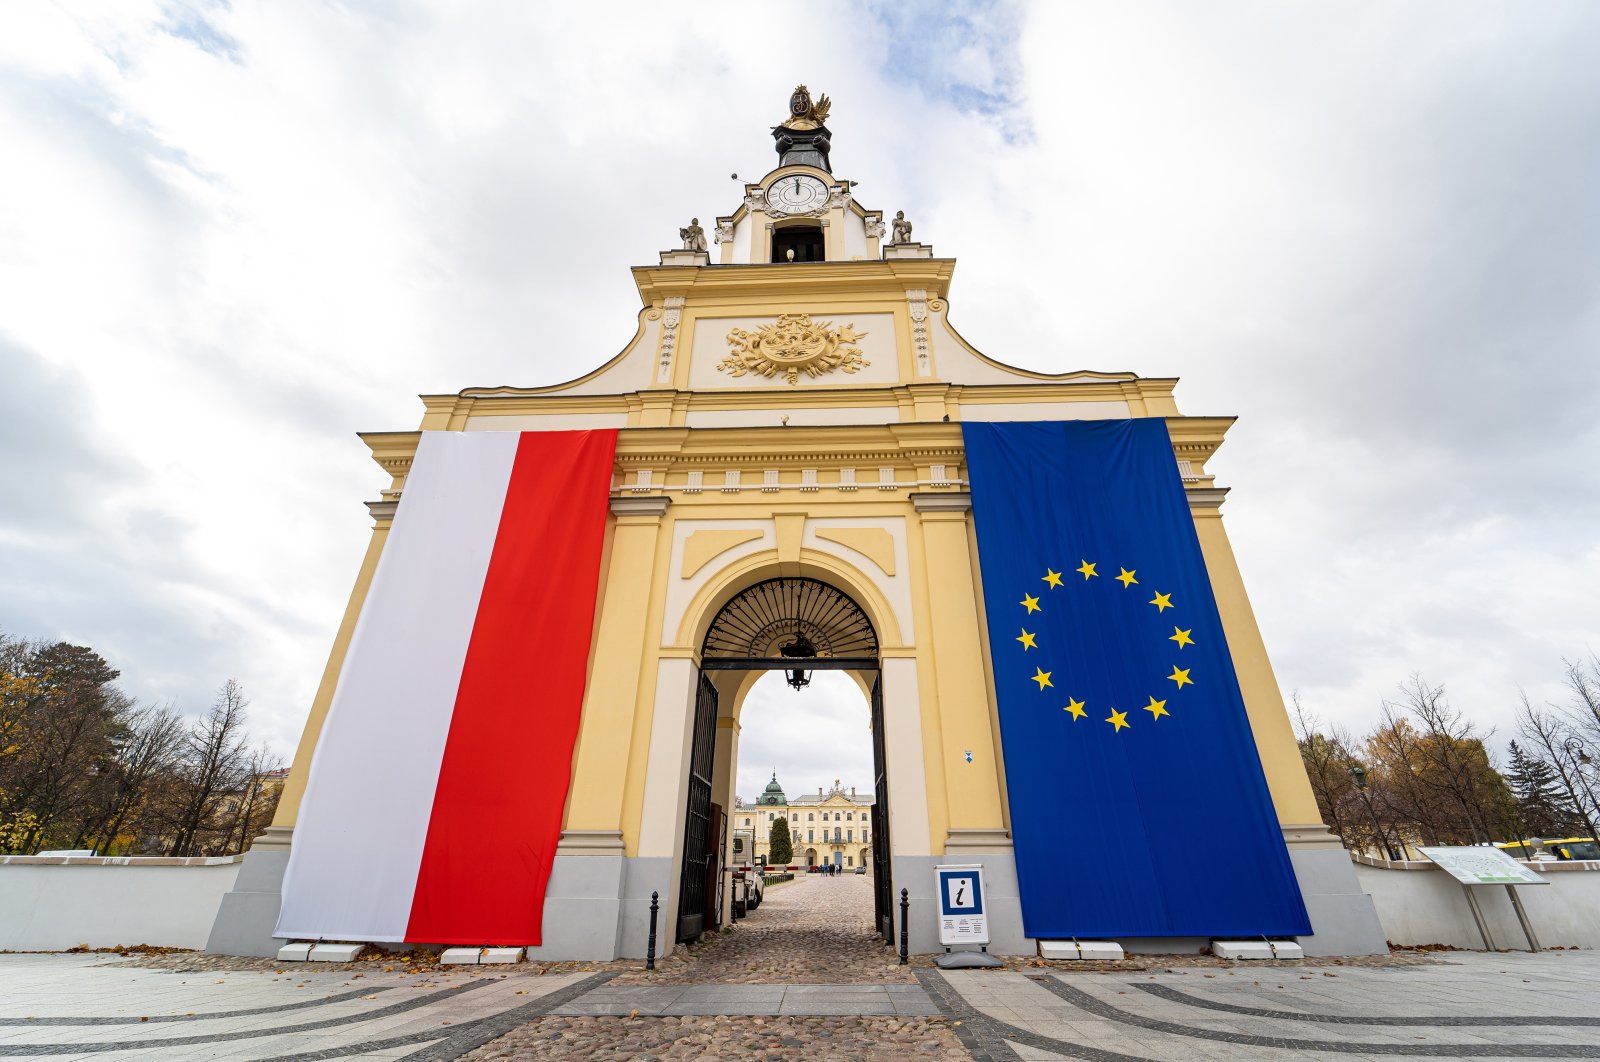 Polish and European Union flags on the entrance gate to the Branicki Palace in Bialystok, Poland, Oct. 22, 2021. (Photo by Shutterstock)